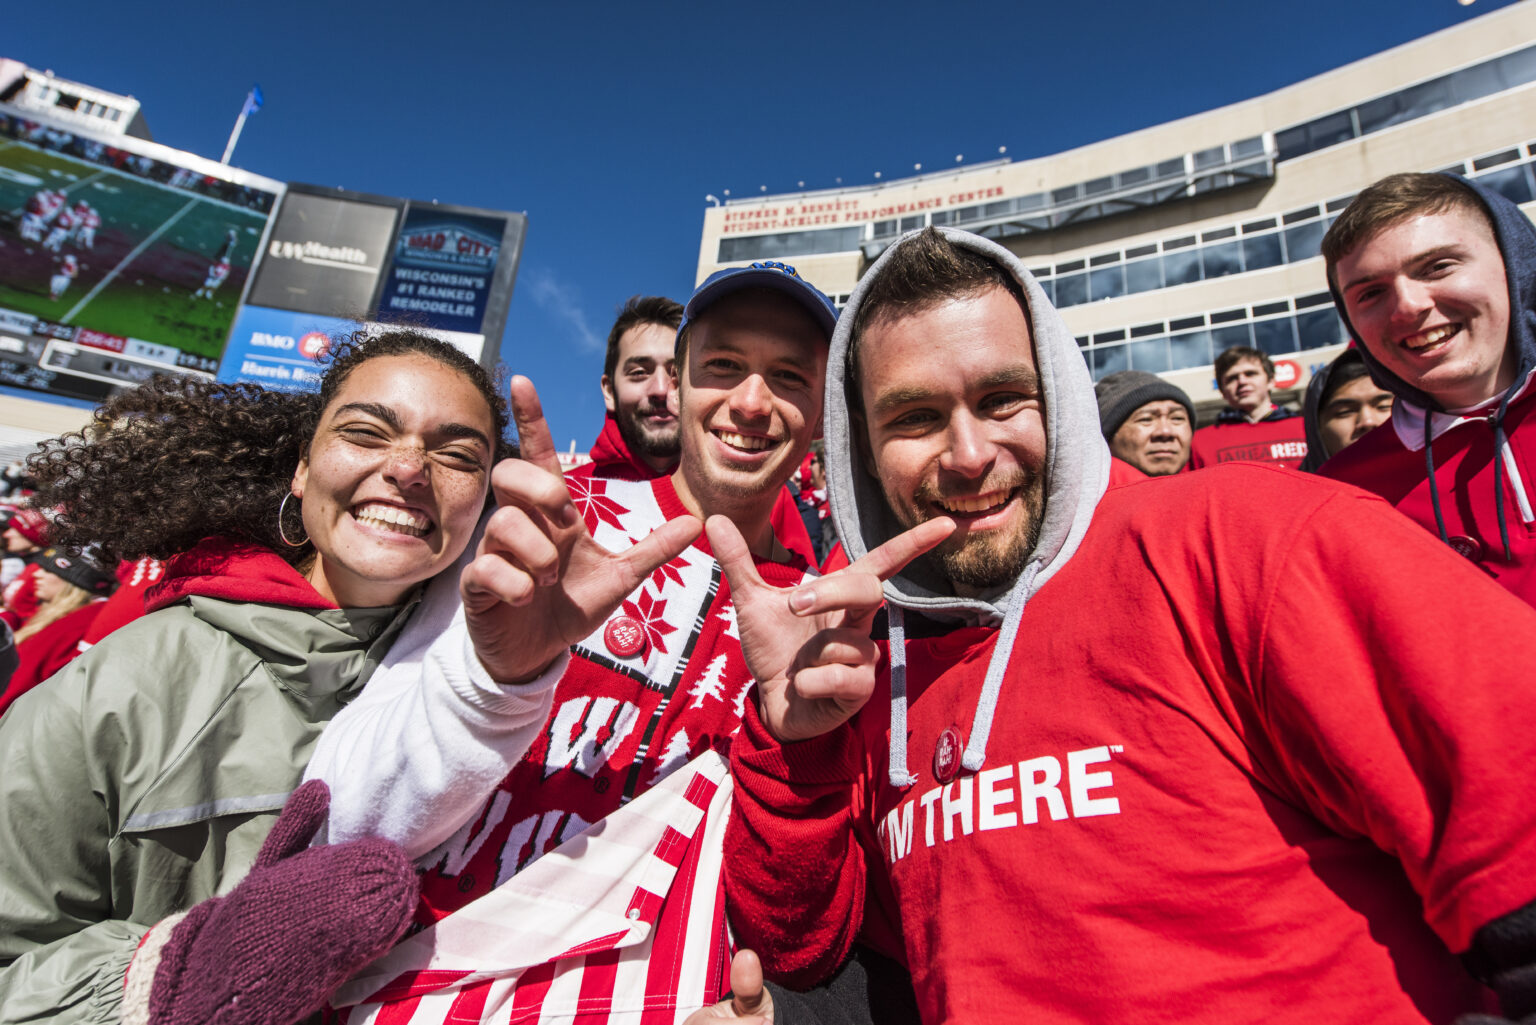 UWMadison Students, Be Part of the Fun Committee Looking